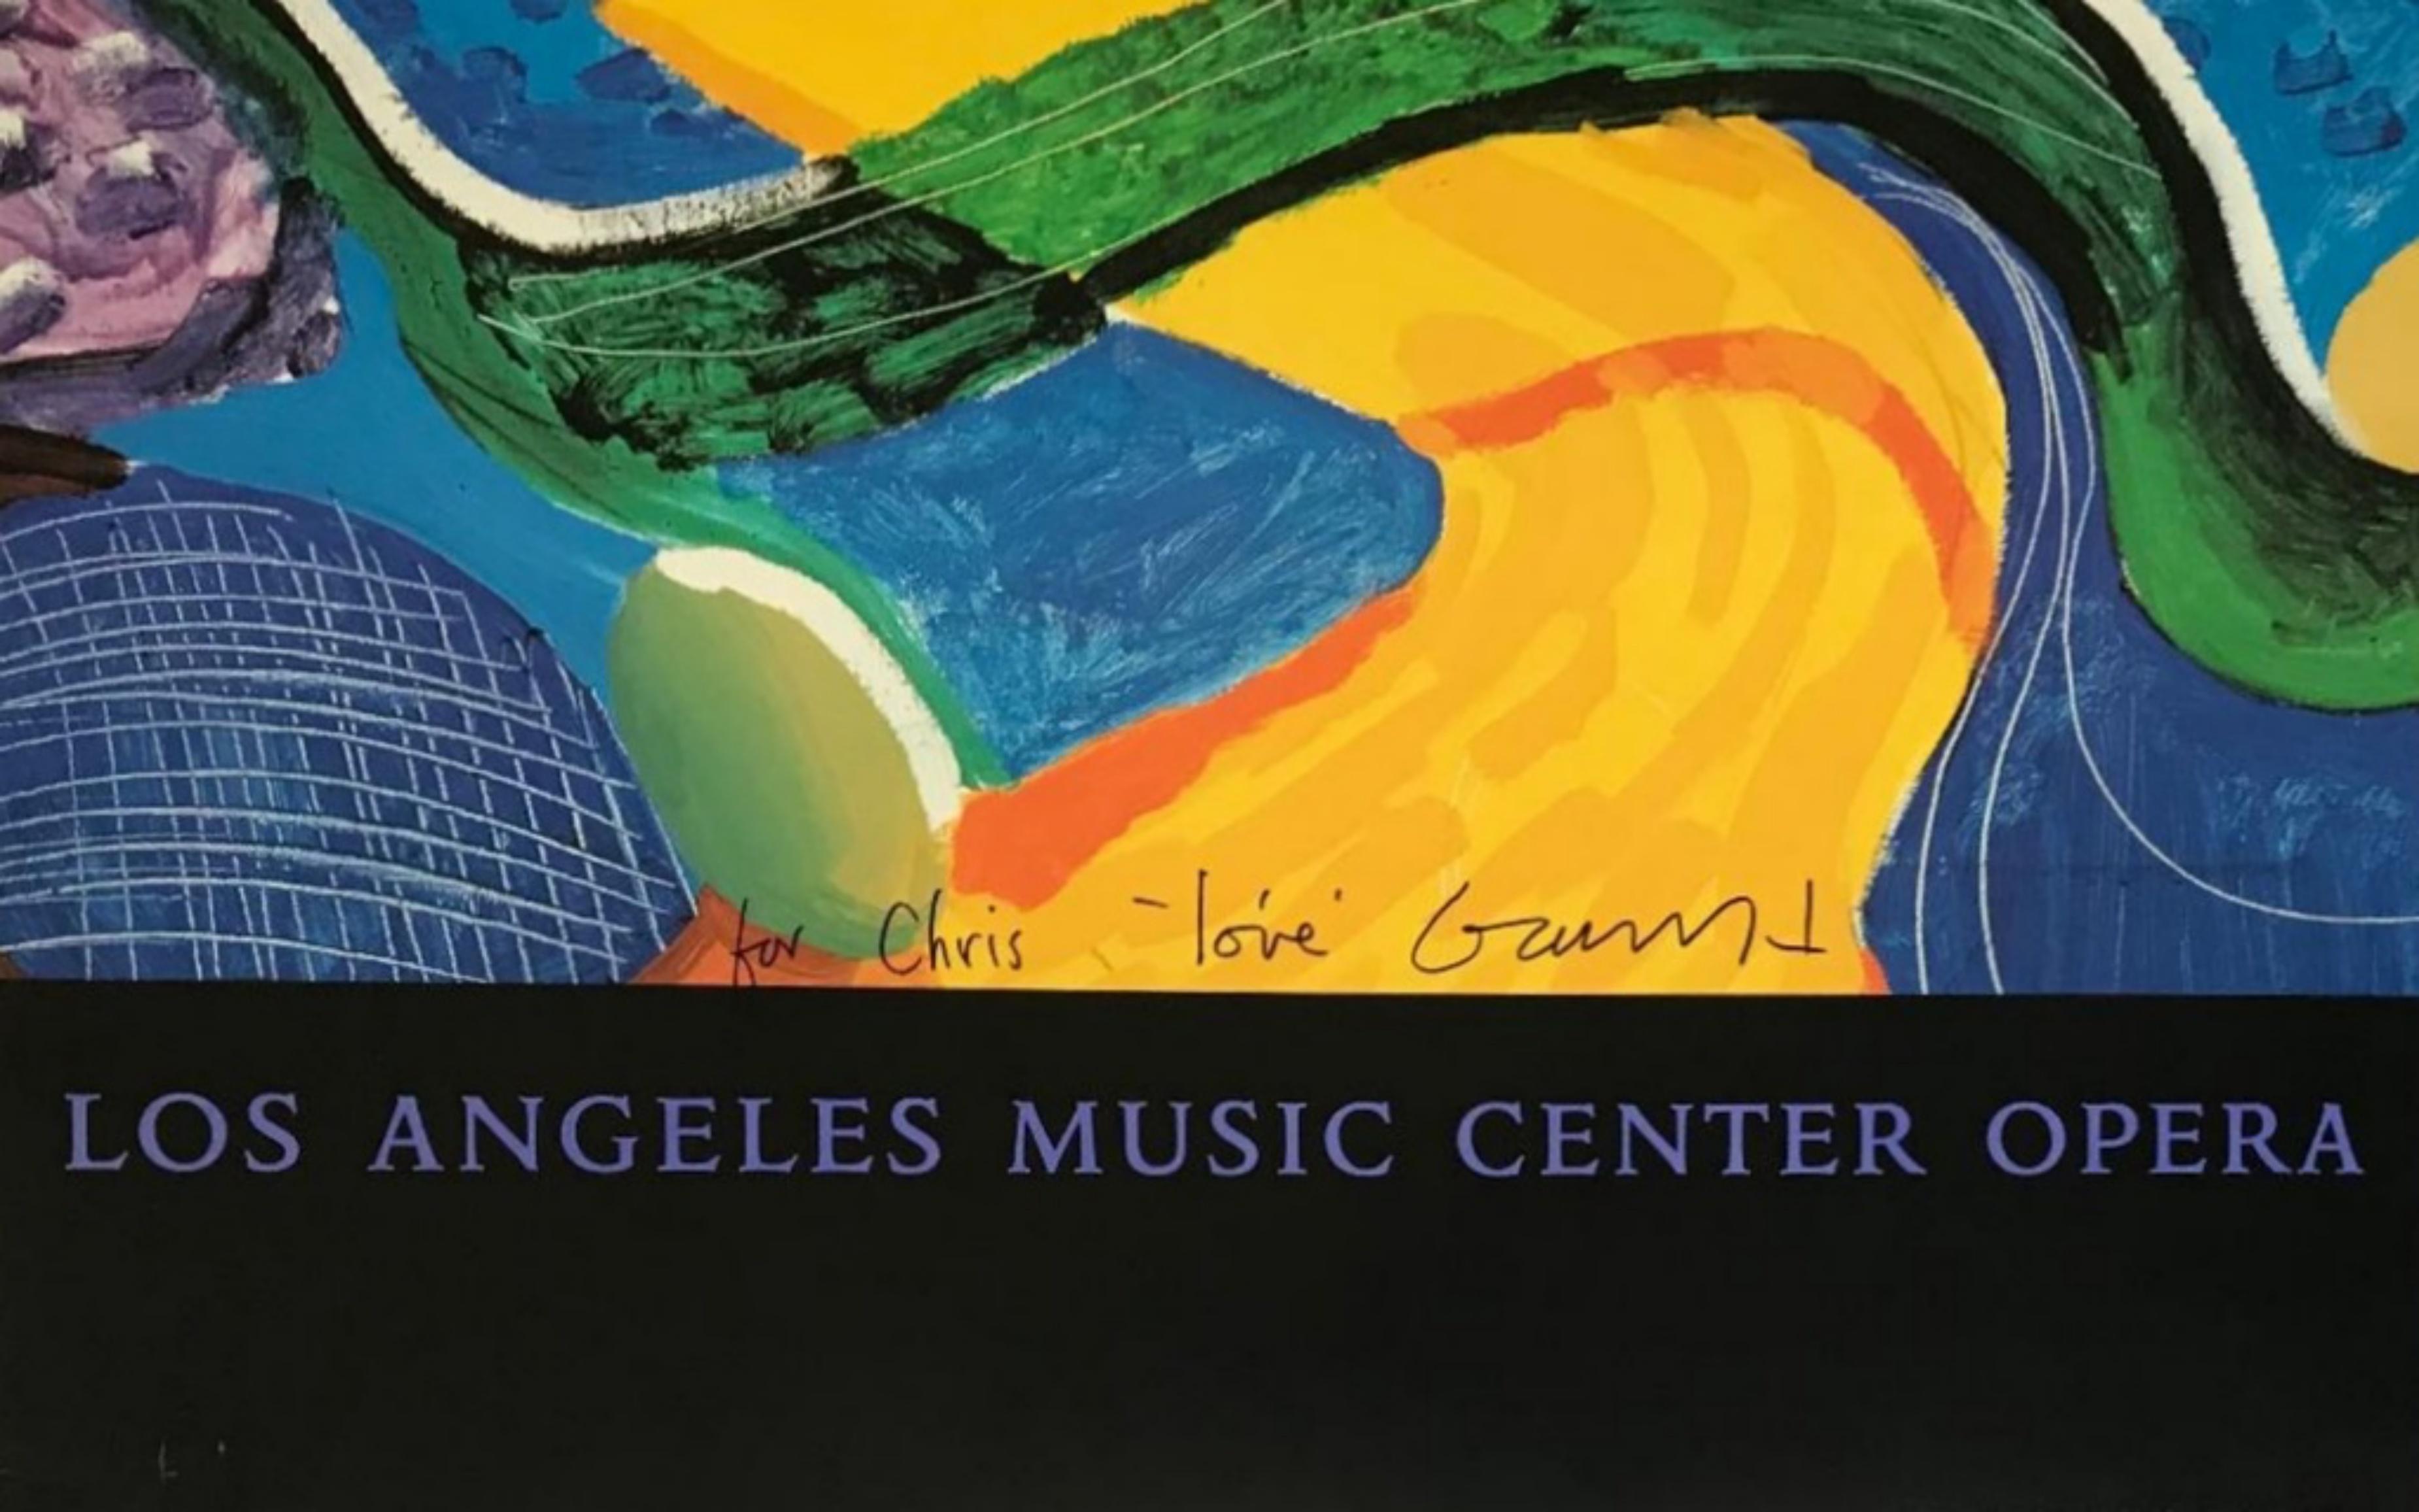 The Golden Road, Los Angeles Music Center Opera poster (Hand Signed & inscribed) - Print by David Hockney